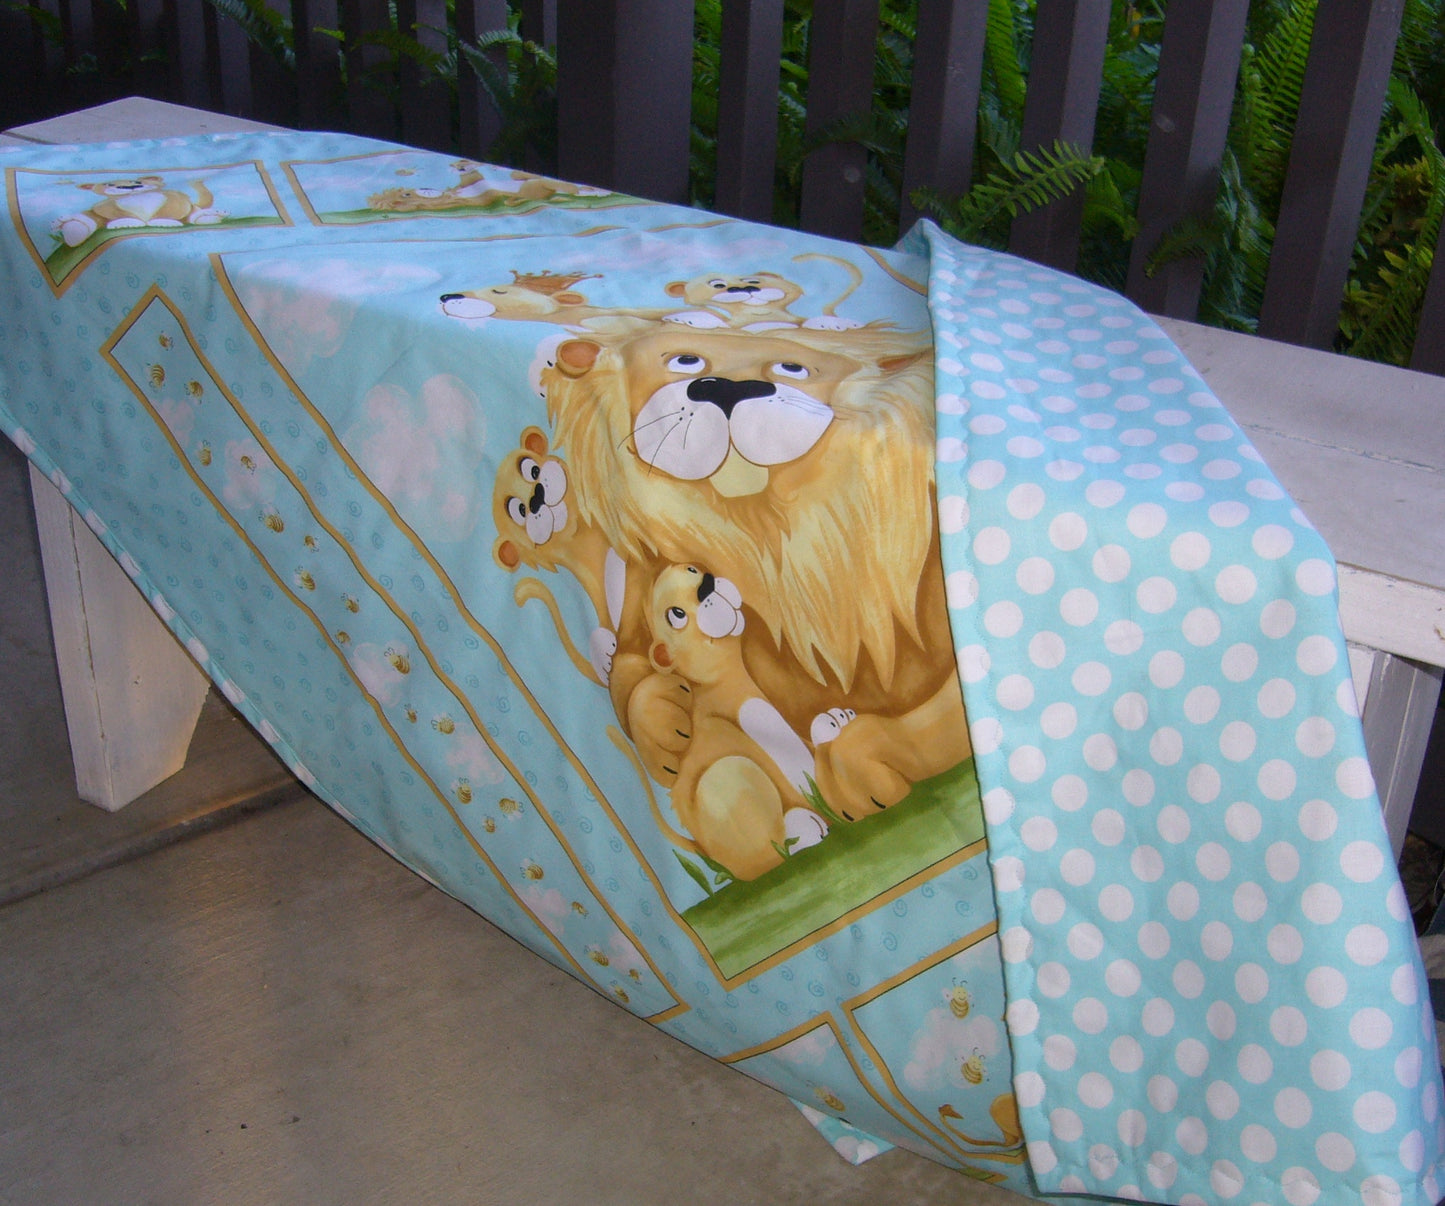 LION AND BABY CUBS FAMILY Pastel Comforter Blanket Baby Nursery Gender Neutral Child Toddler Bedding to Adult Lap Quilt